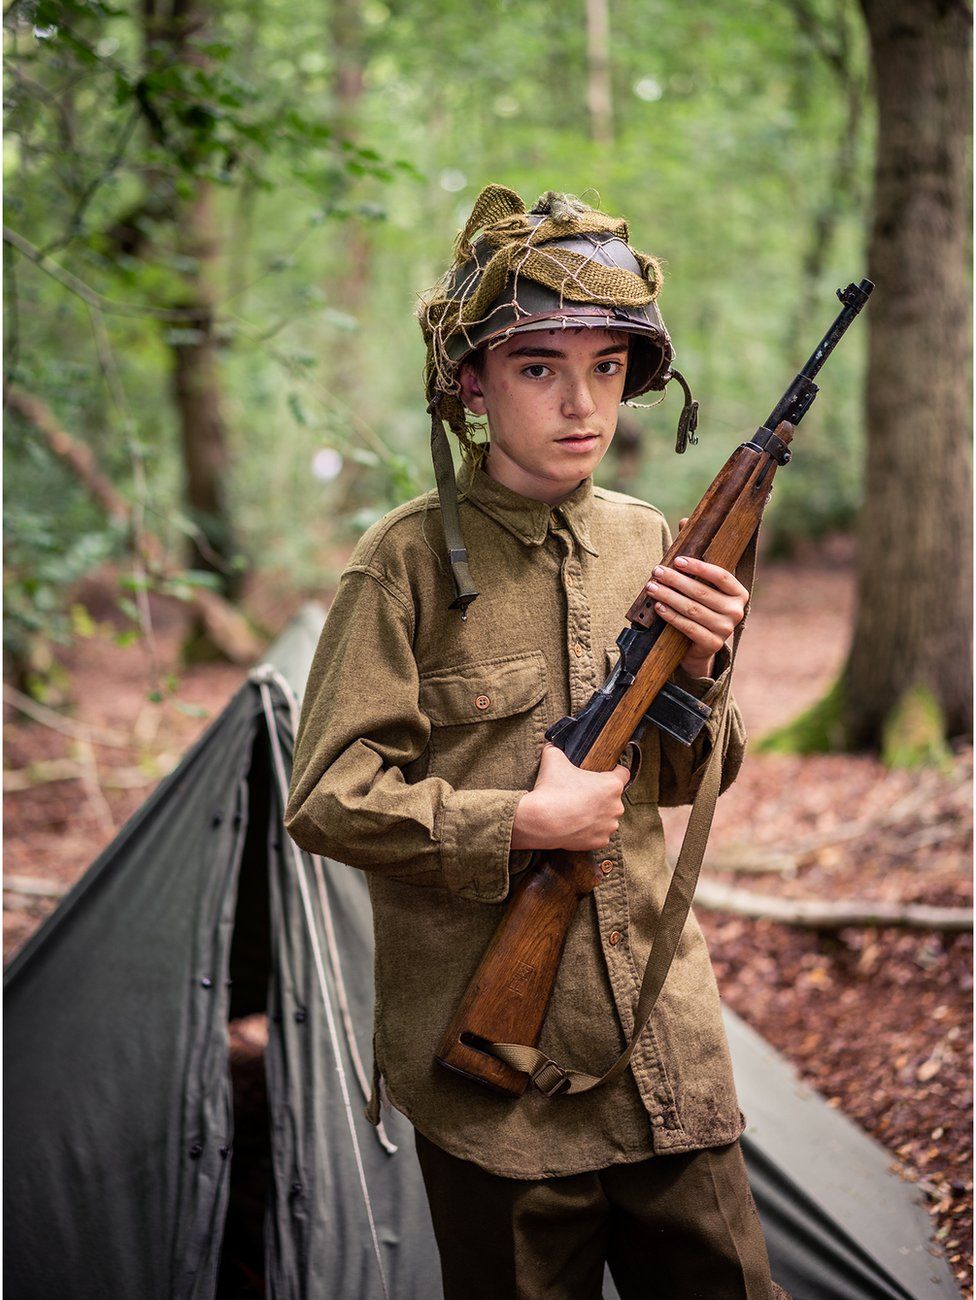 A boy stands in the woods dressed as a solider from World War Two